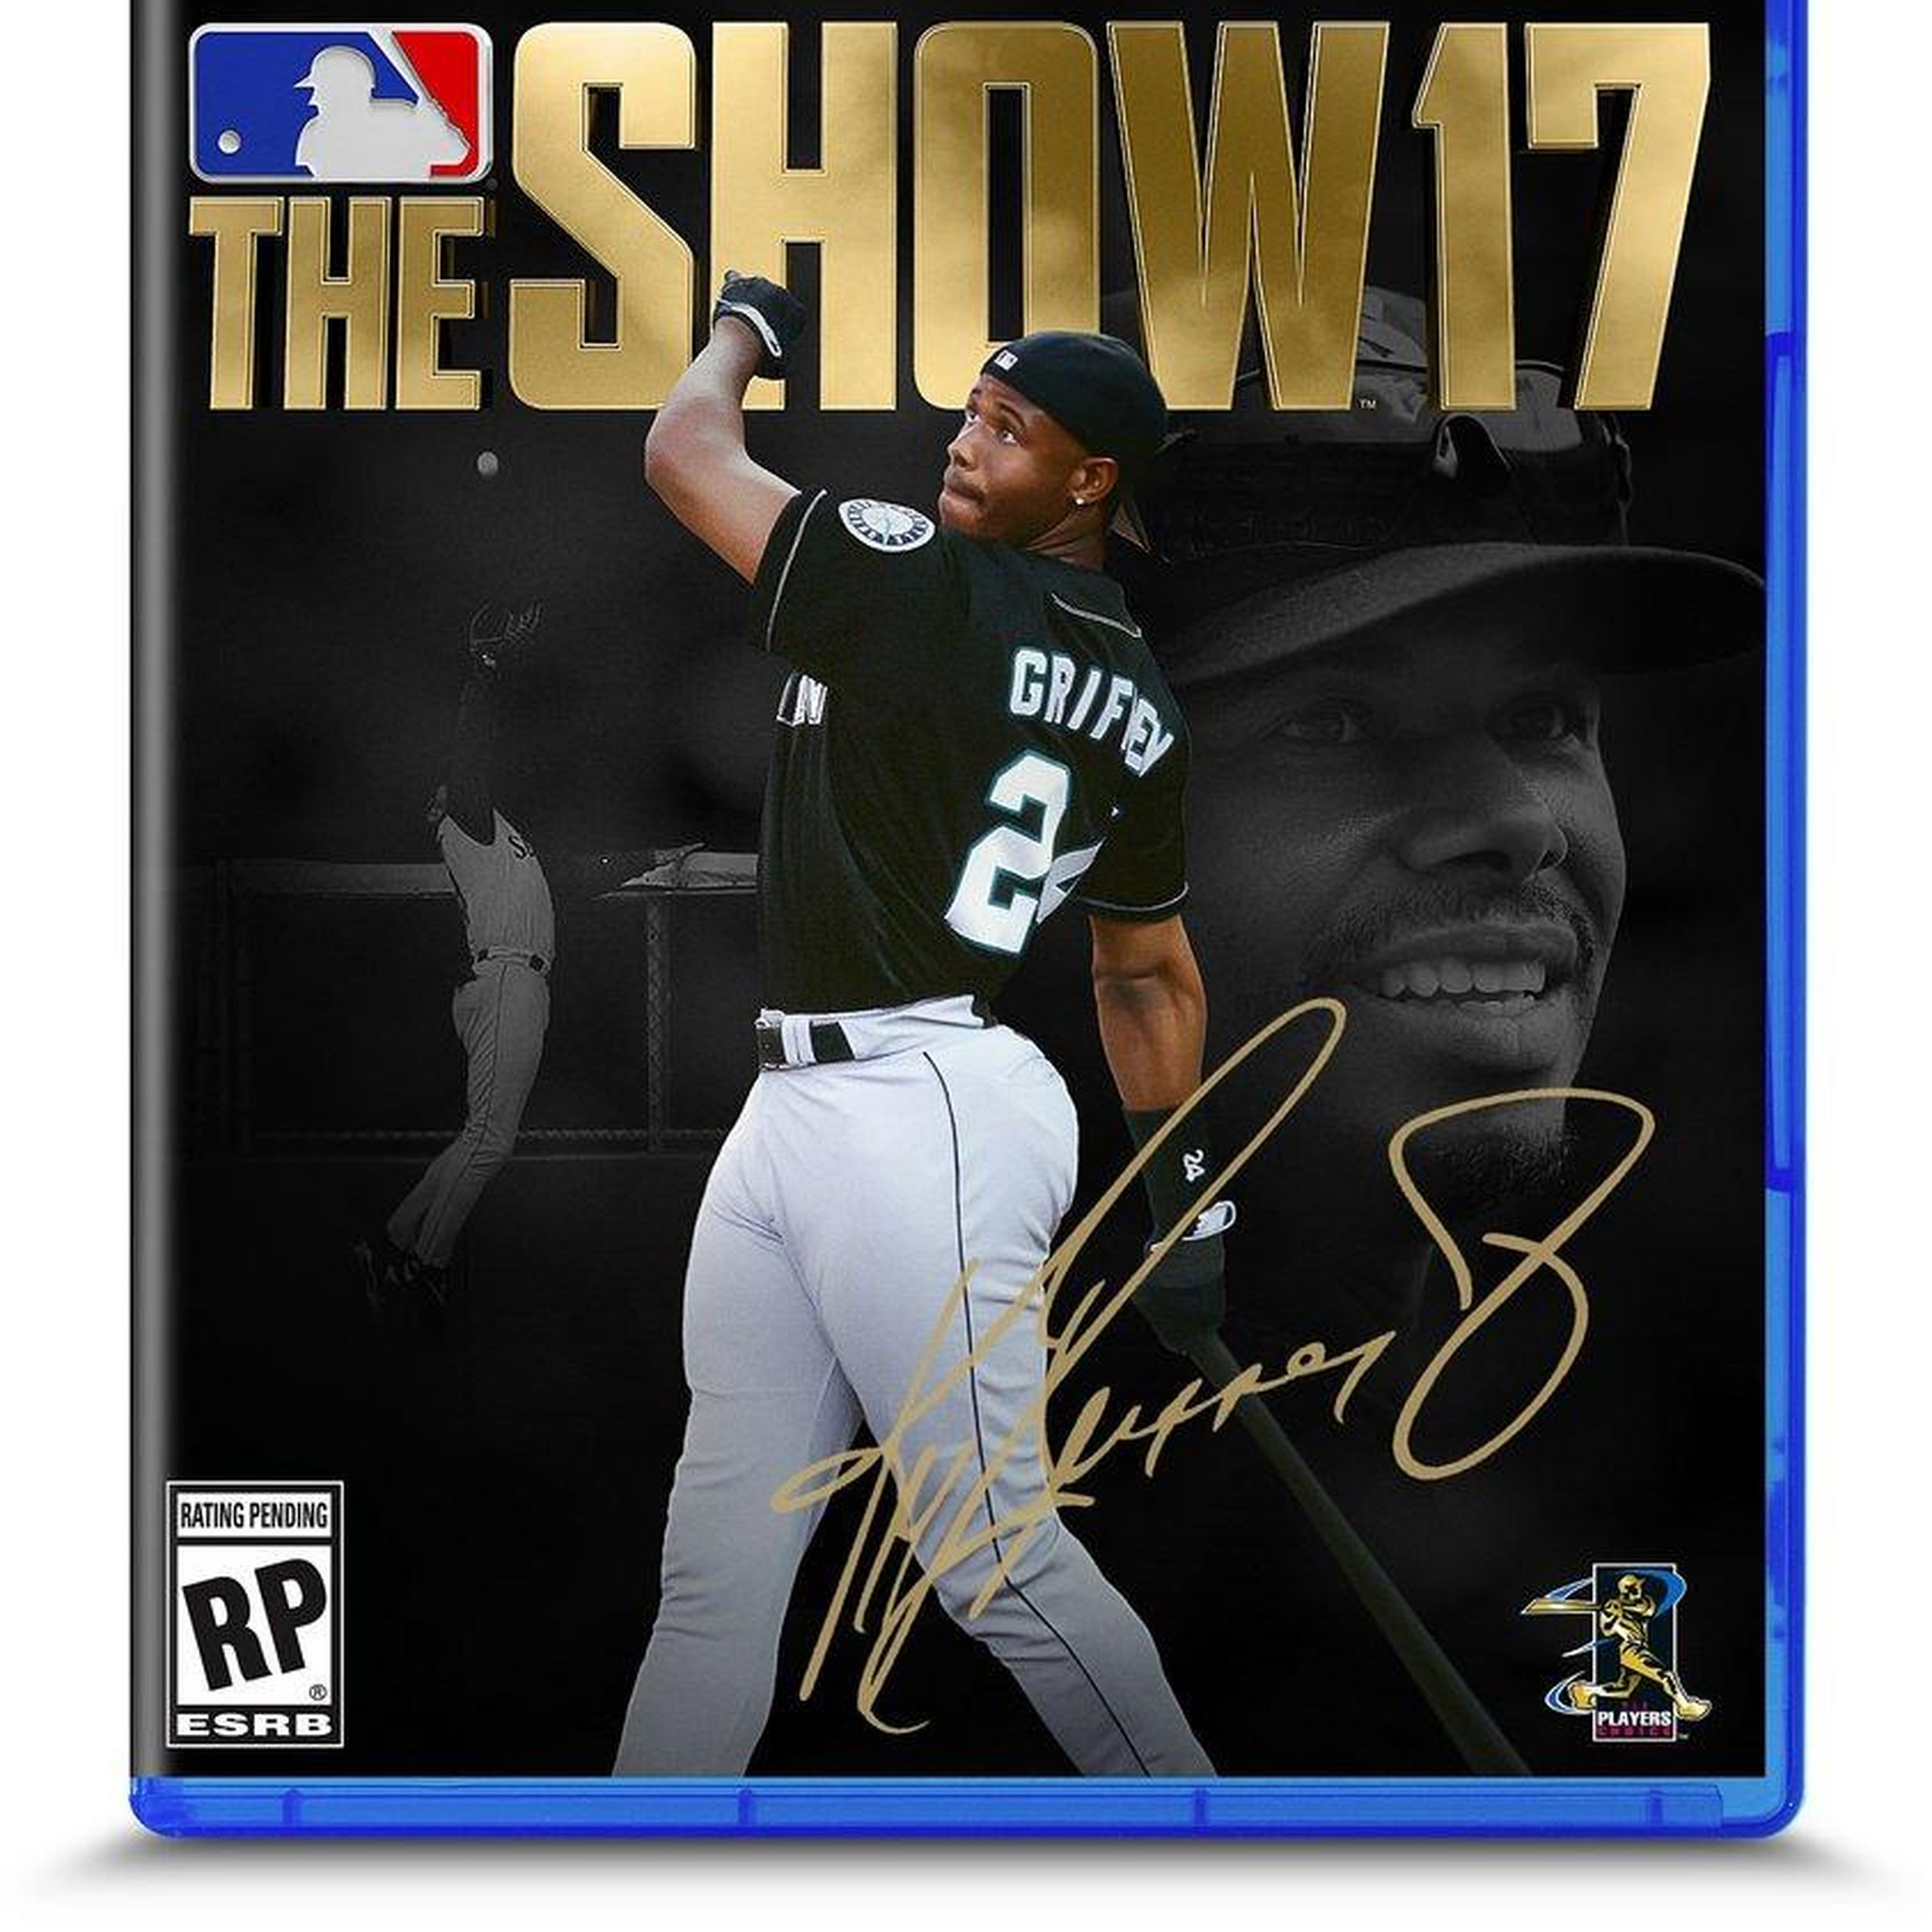 Ken Griffey Jr. announced as cover athlete of 'MLB The Show 17